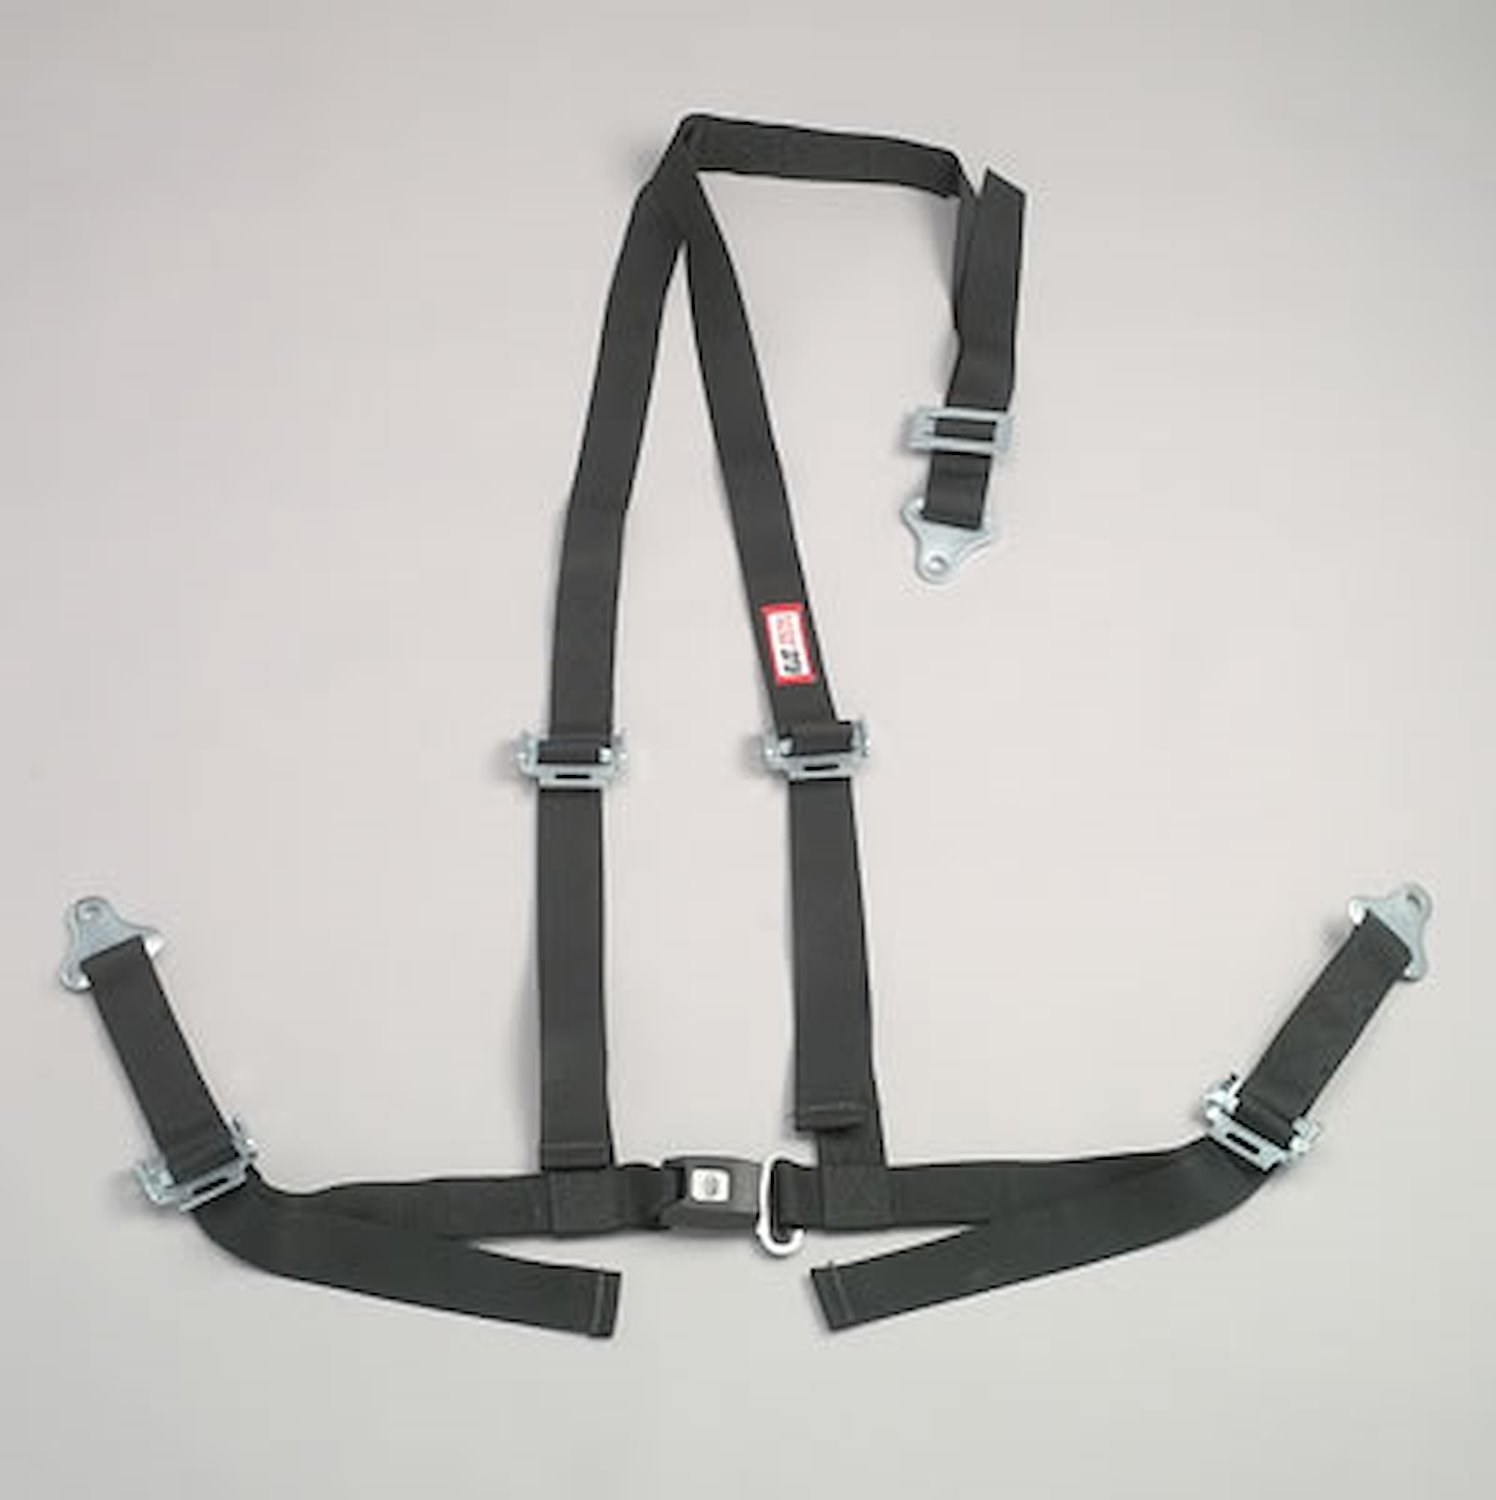 NON-SFI B&T HARNESS 2 PULL DOWN Lap Belt 2 S. H. Individual FLOOR Mount ALL WRAP ENDS w/STERNUM STRAP BLACK